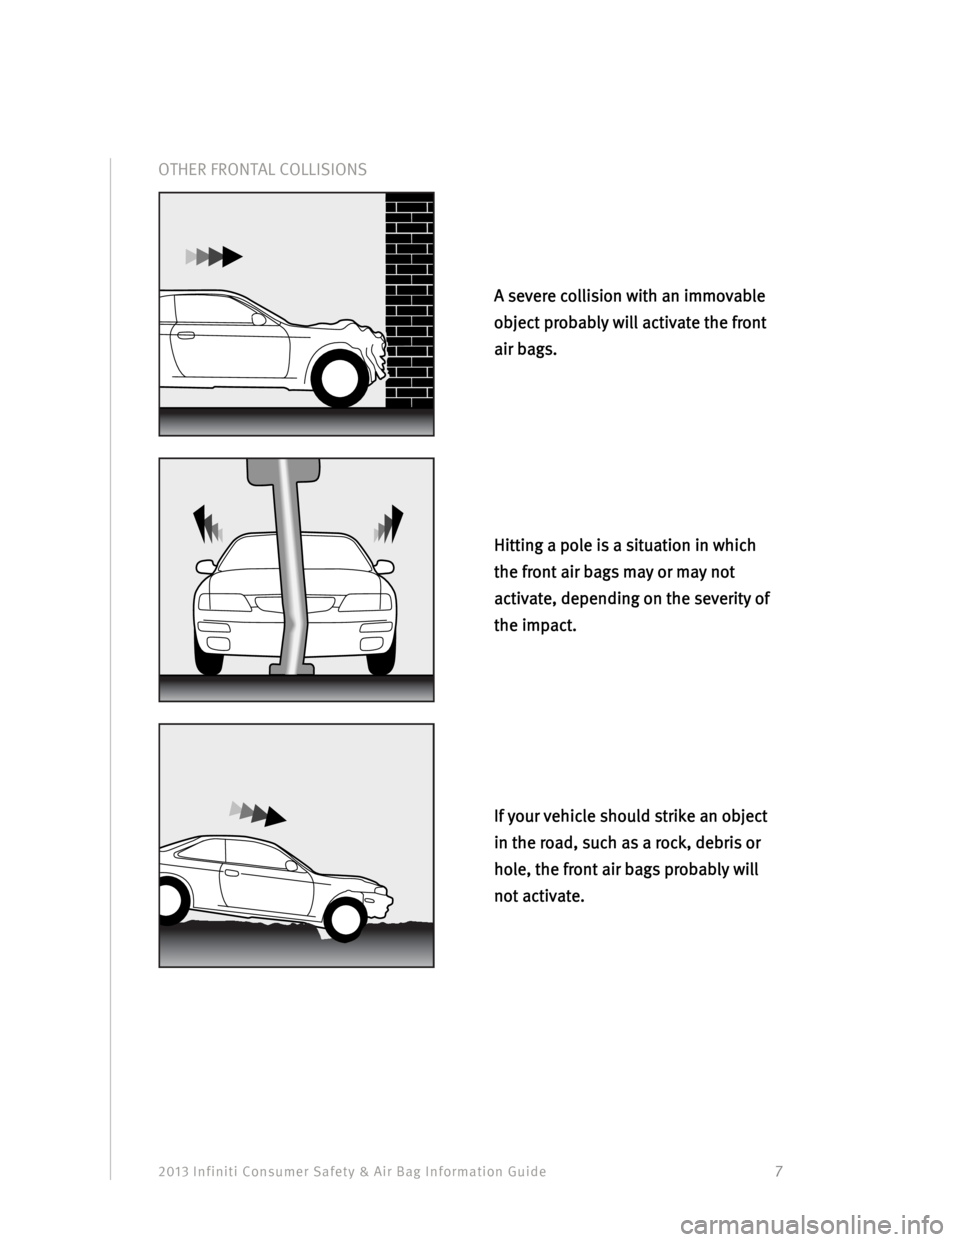 INFINITI QX56 2013  Consumer Safety And Air Bag Information Guide 2013 Infiniti Consumer Safety & Air Bag Information Guide                                         7 
OTHER FRONTAL COLLISIONS  
 
 
 
 
 
If your vehicle should strike an object 
in the road, such as 